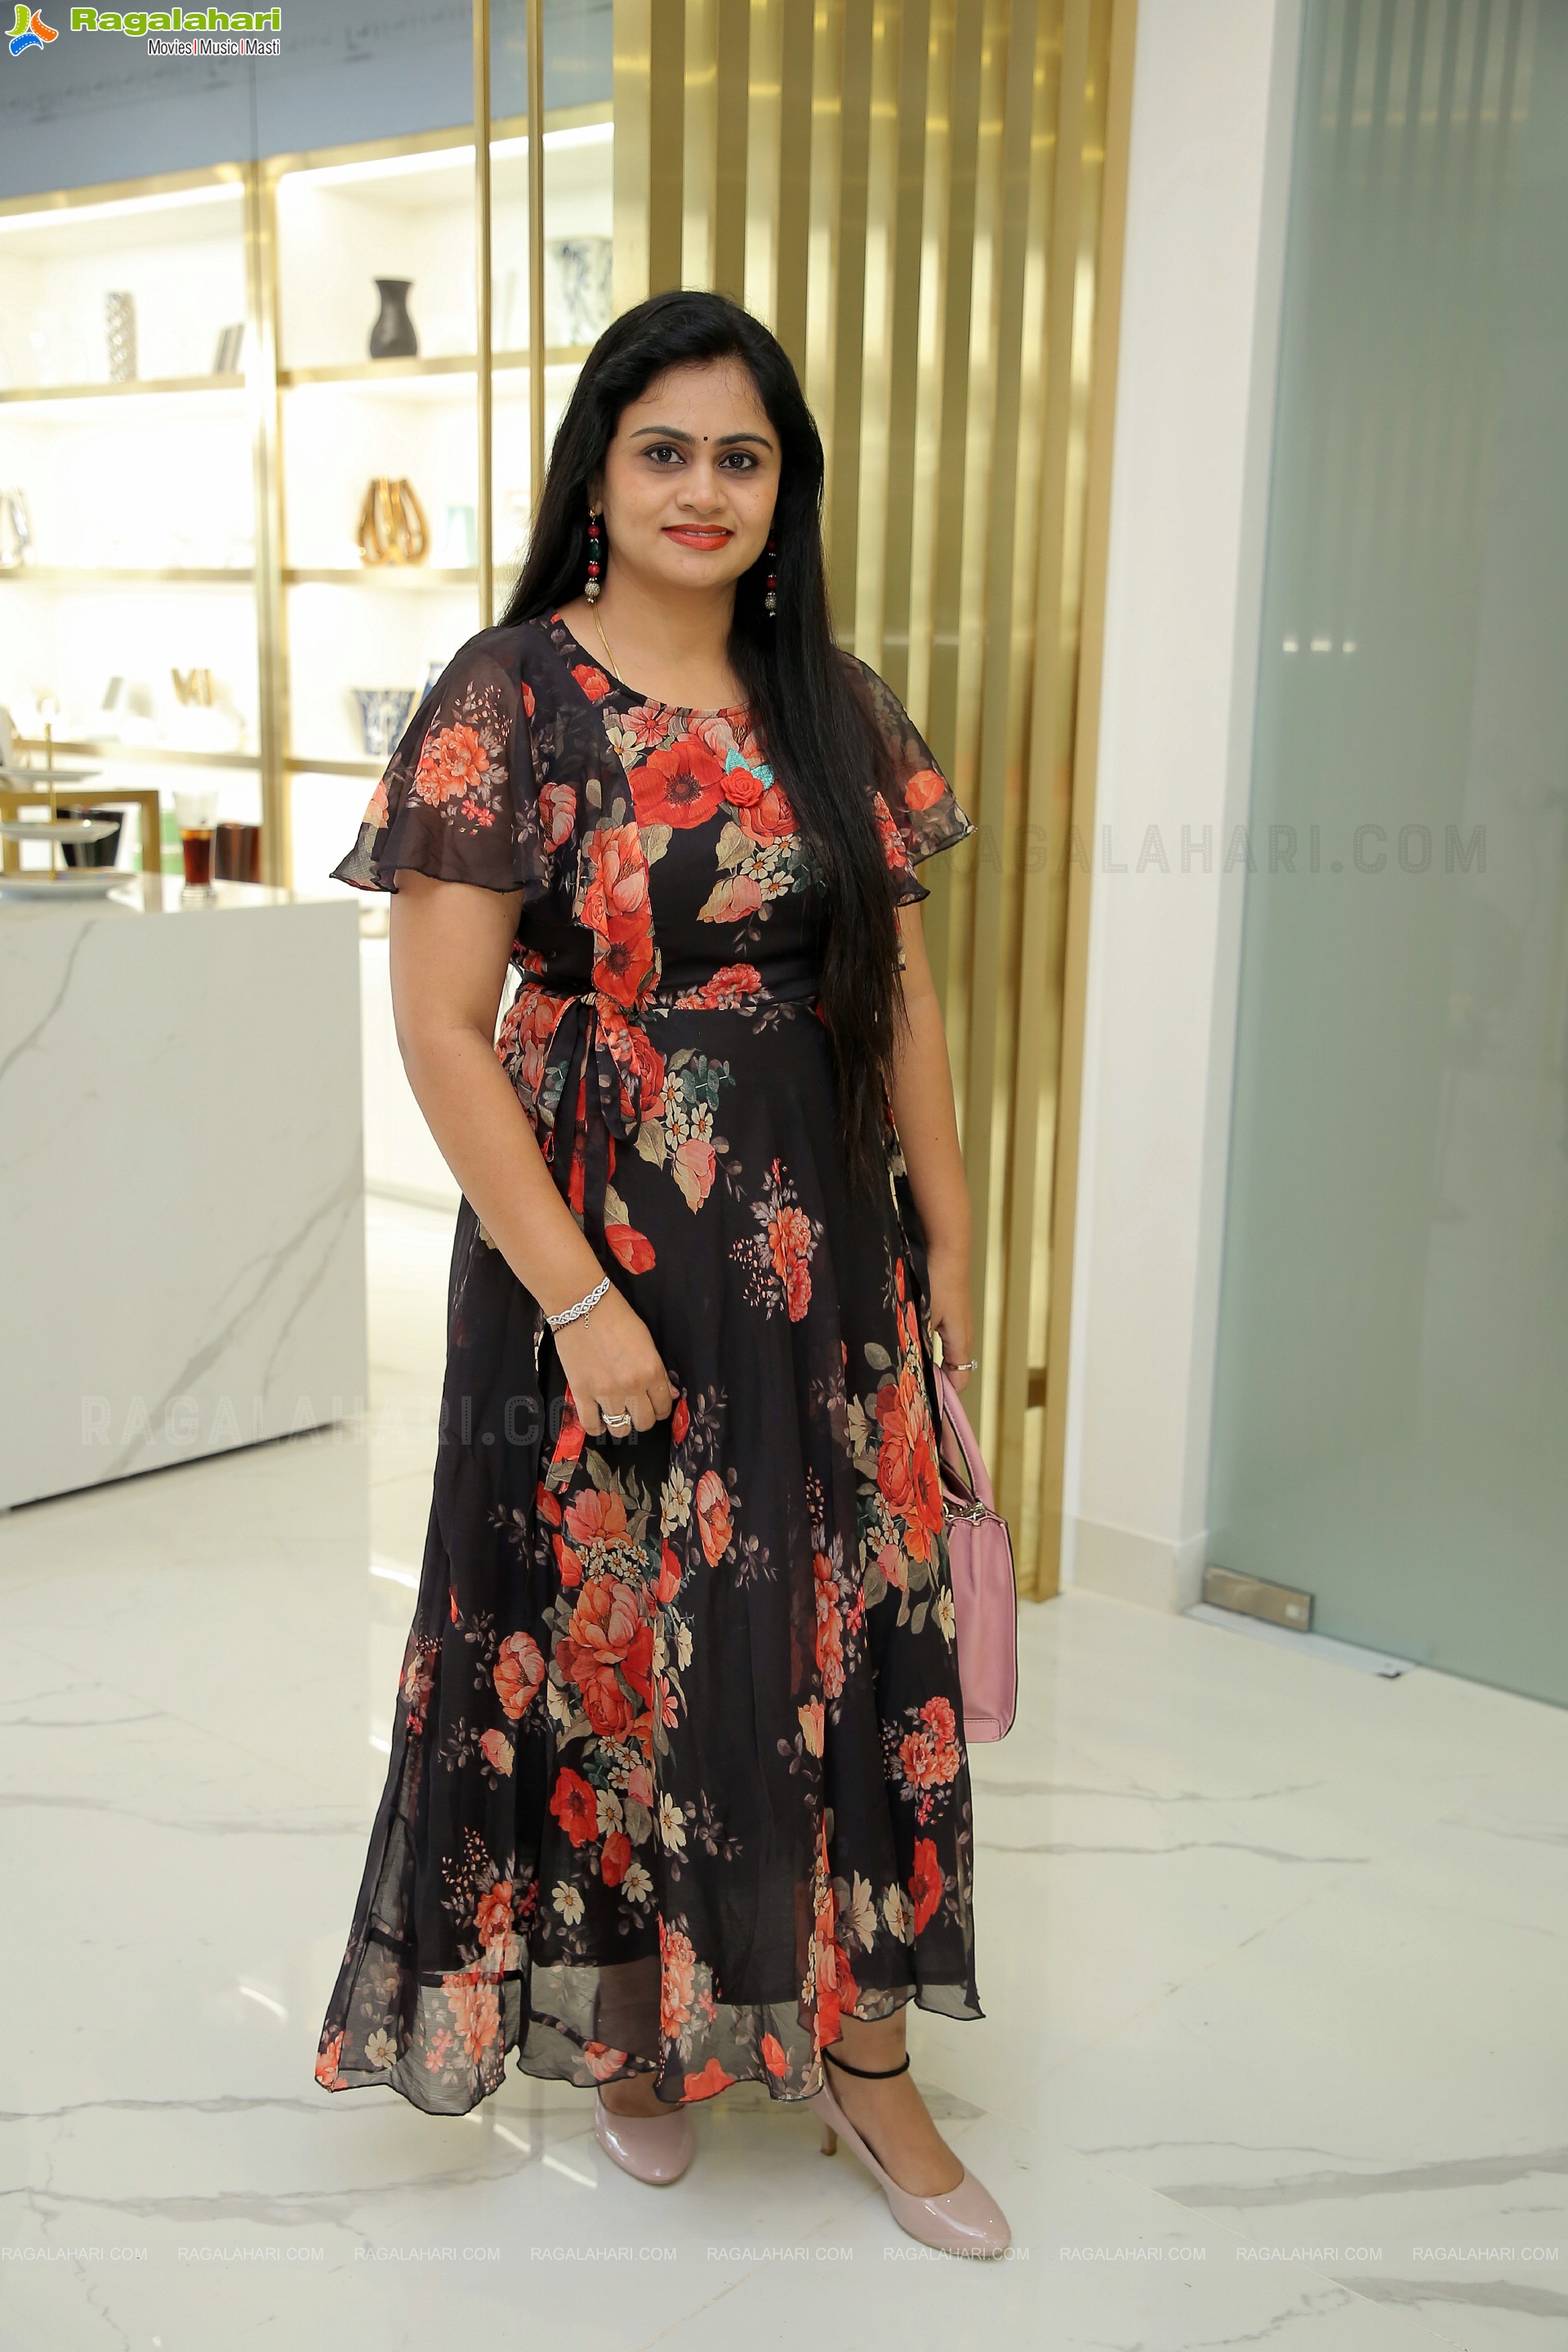 Hetvi Grand Opening and Versace New Collection Preview at Jubilee Hills